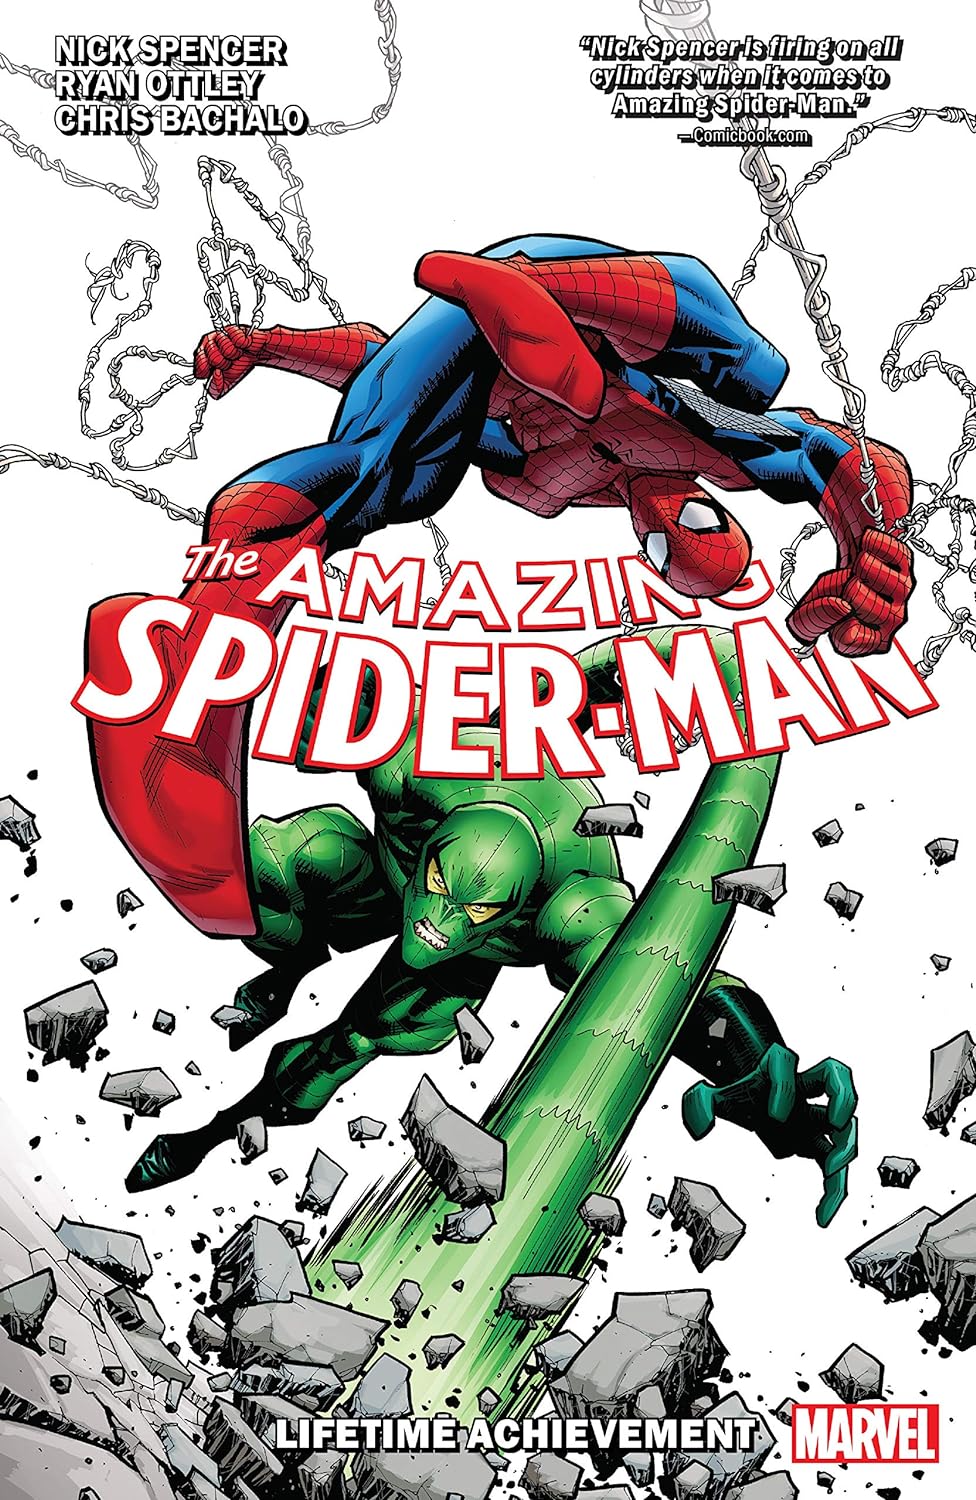 AMAZING SPIDER-MAN BY NICK SPENCER TP VOL 03